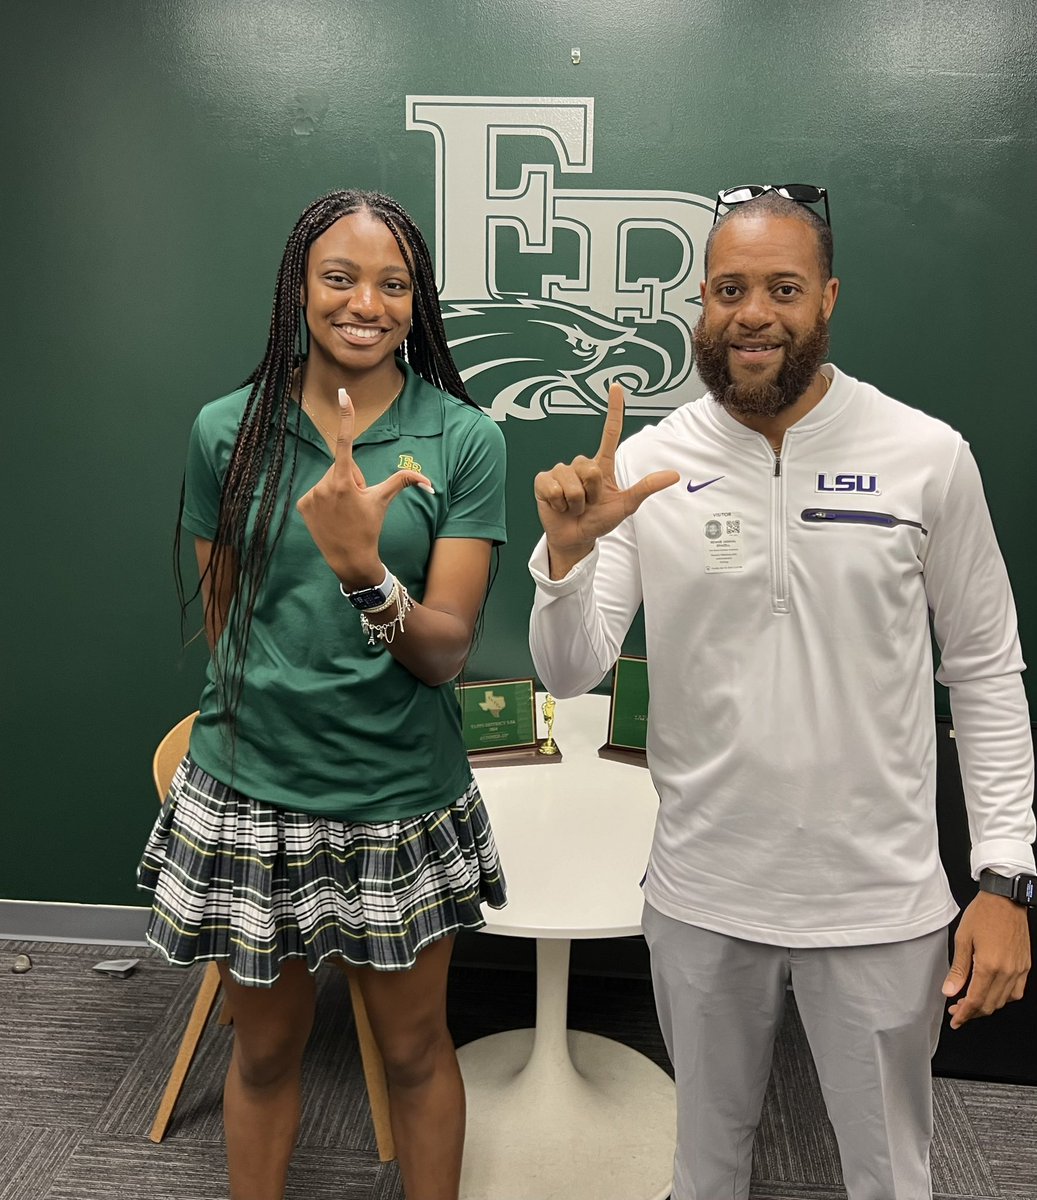 Thanks to @LSUCoachBrazell with @LSUTrackField for stopping by FBCA and recruiting our athlete @BayleighMinor. @FBTrackField